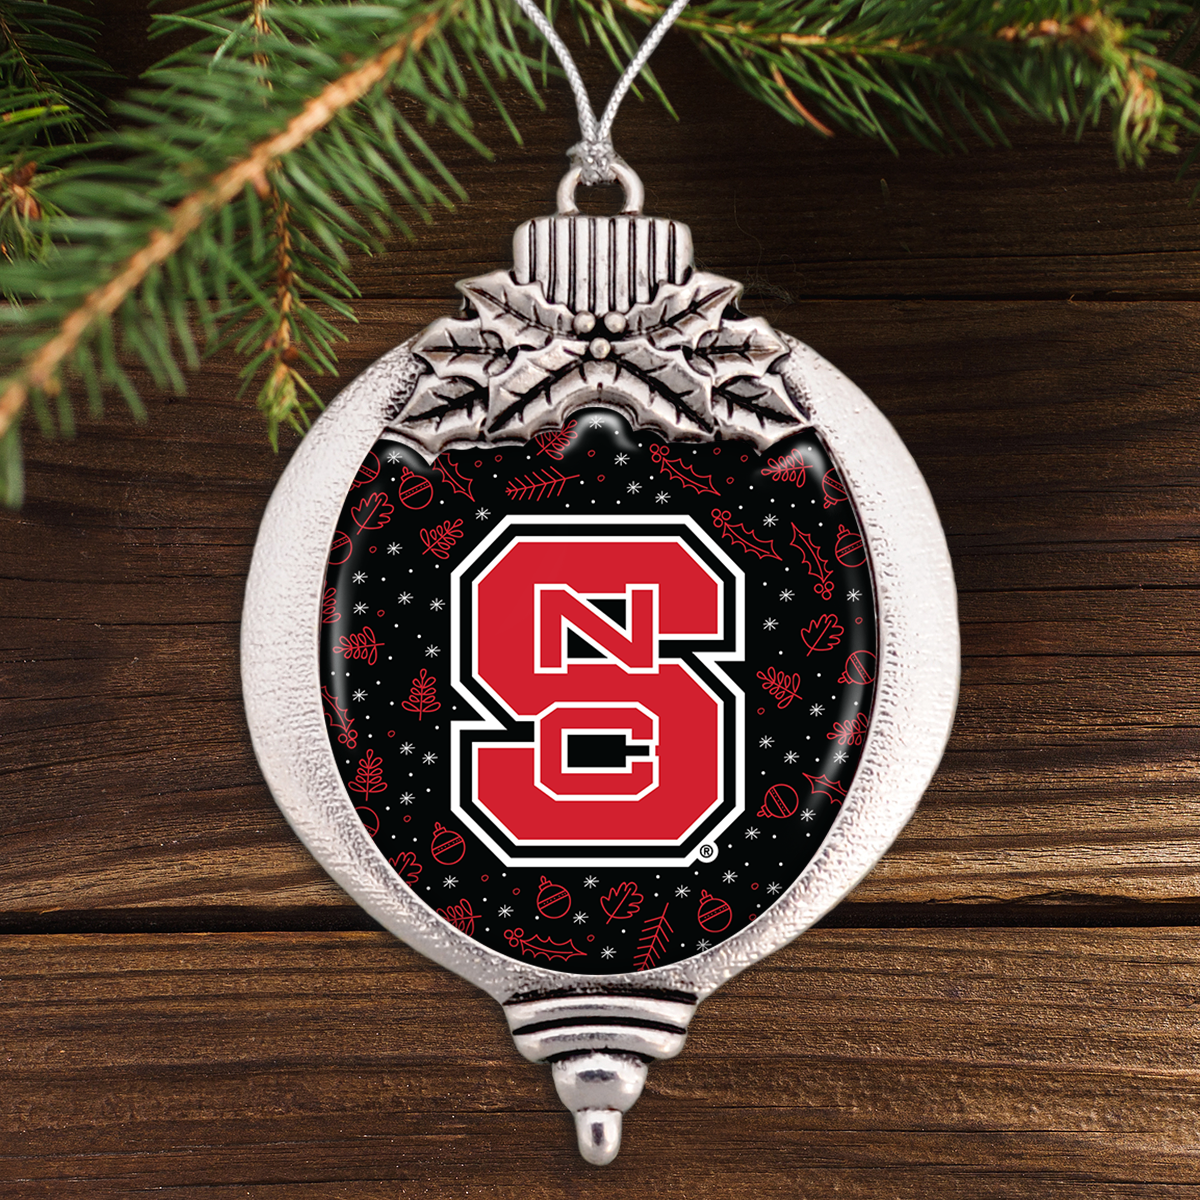 N.C. State Wolfpack Holiday Bulb Ornament